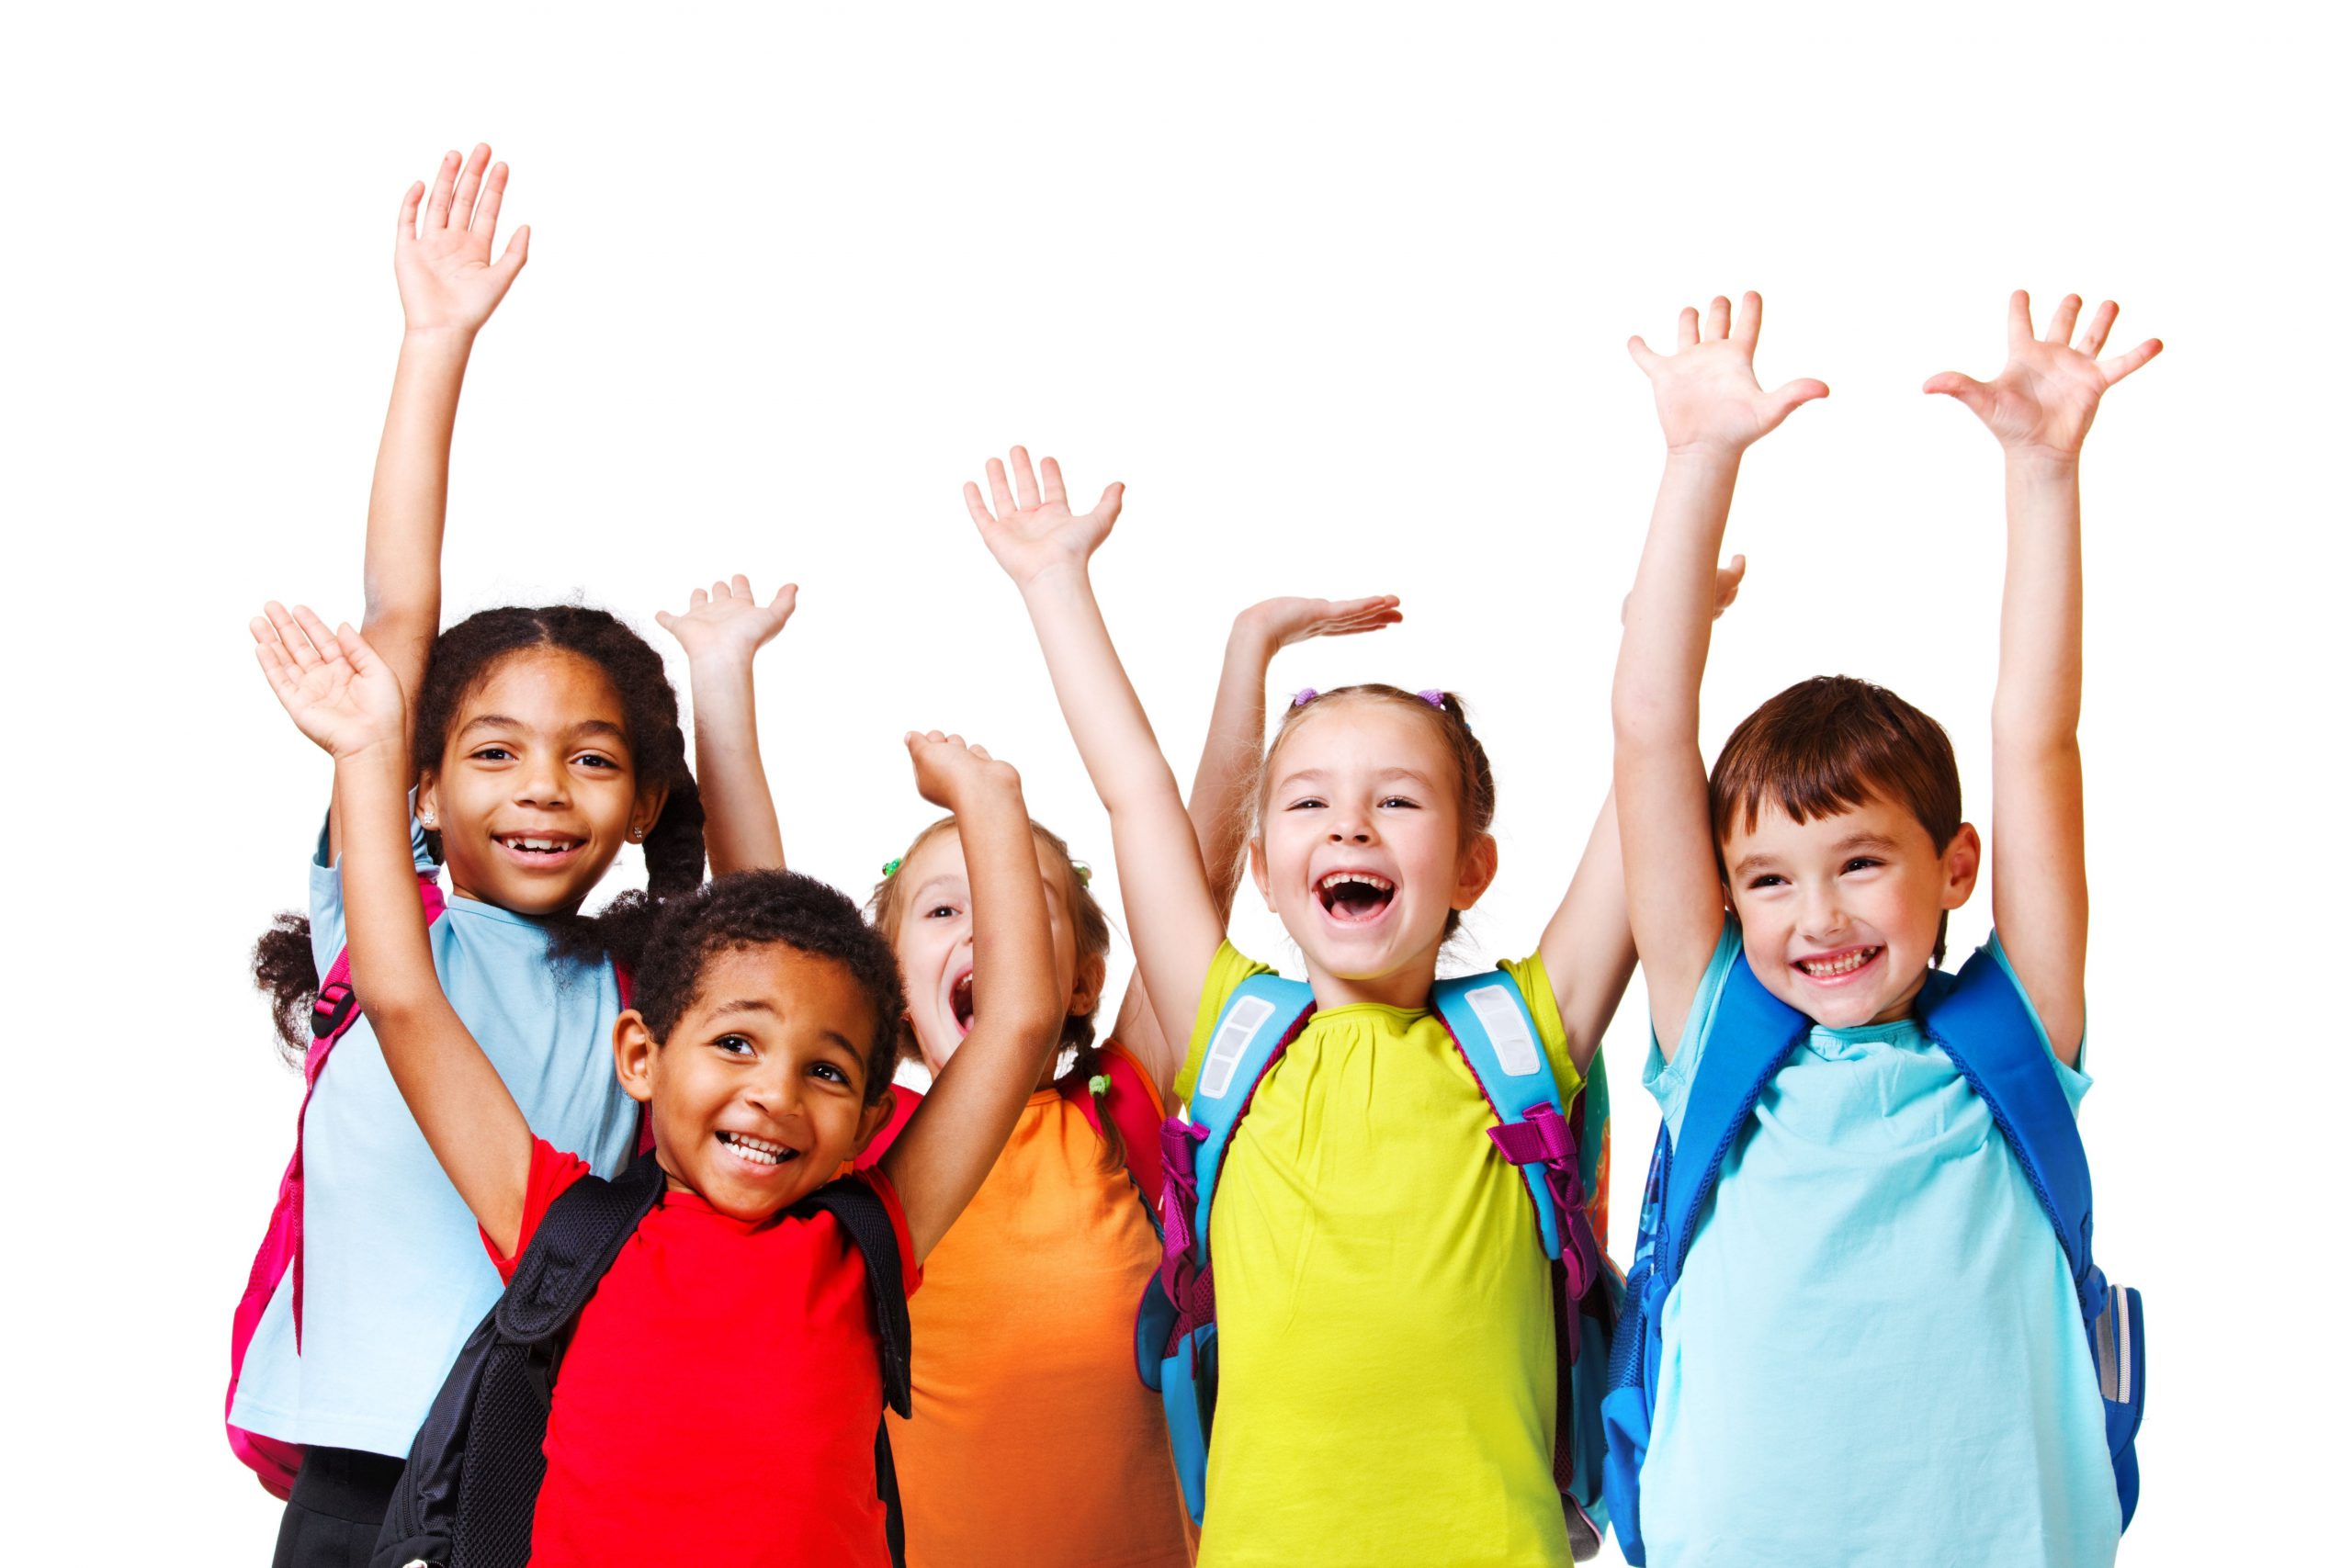 School children with backpacks smiling and throwing hands in the air